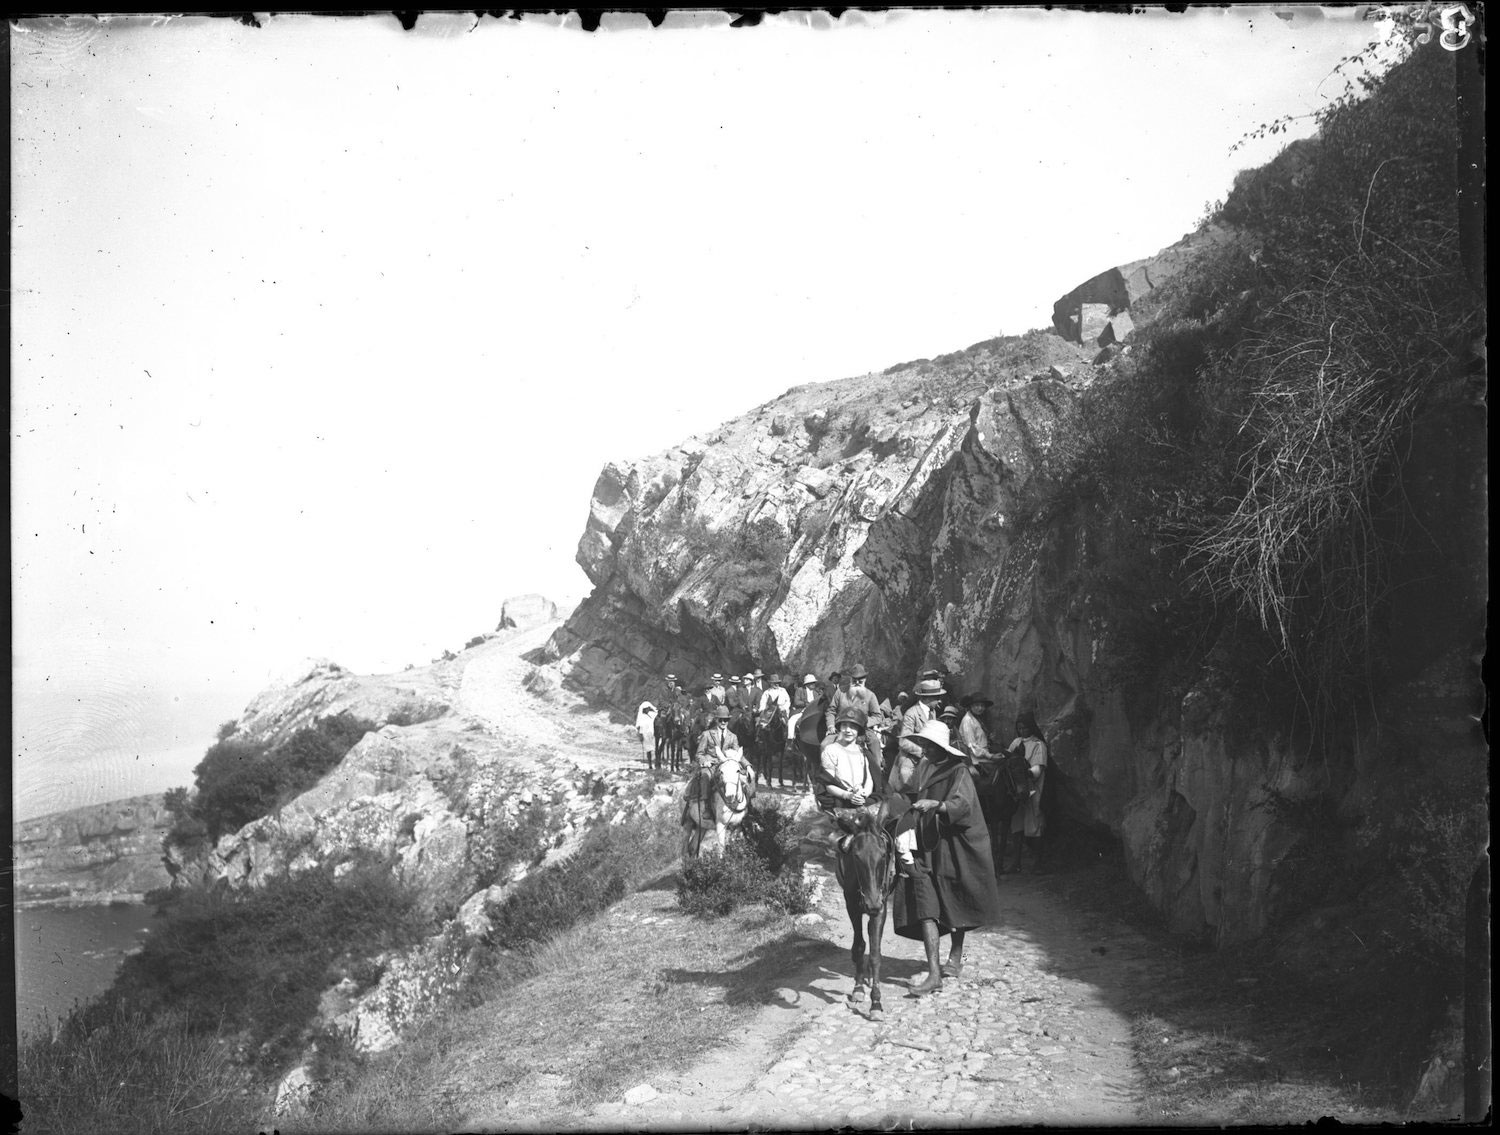 A large group of European tourists on mules on the Agla Path to Cap Spartel